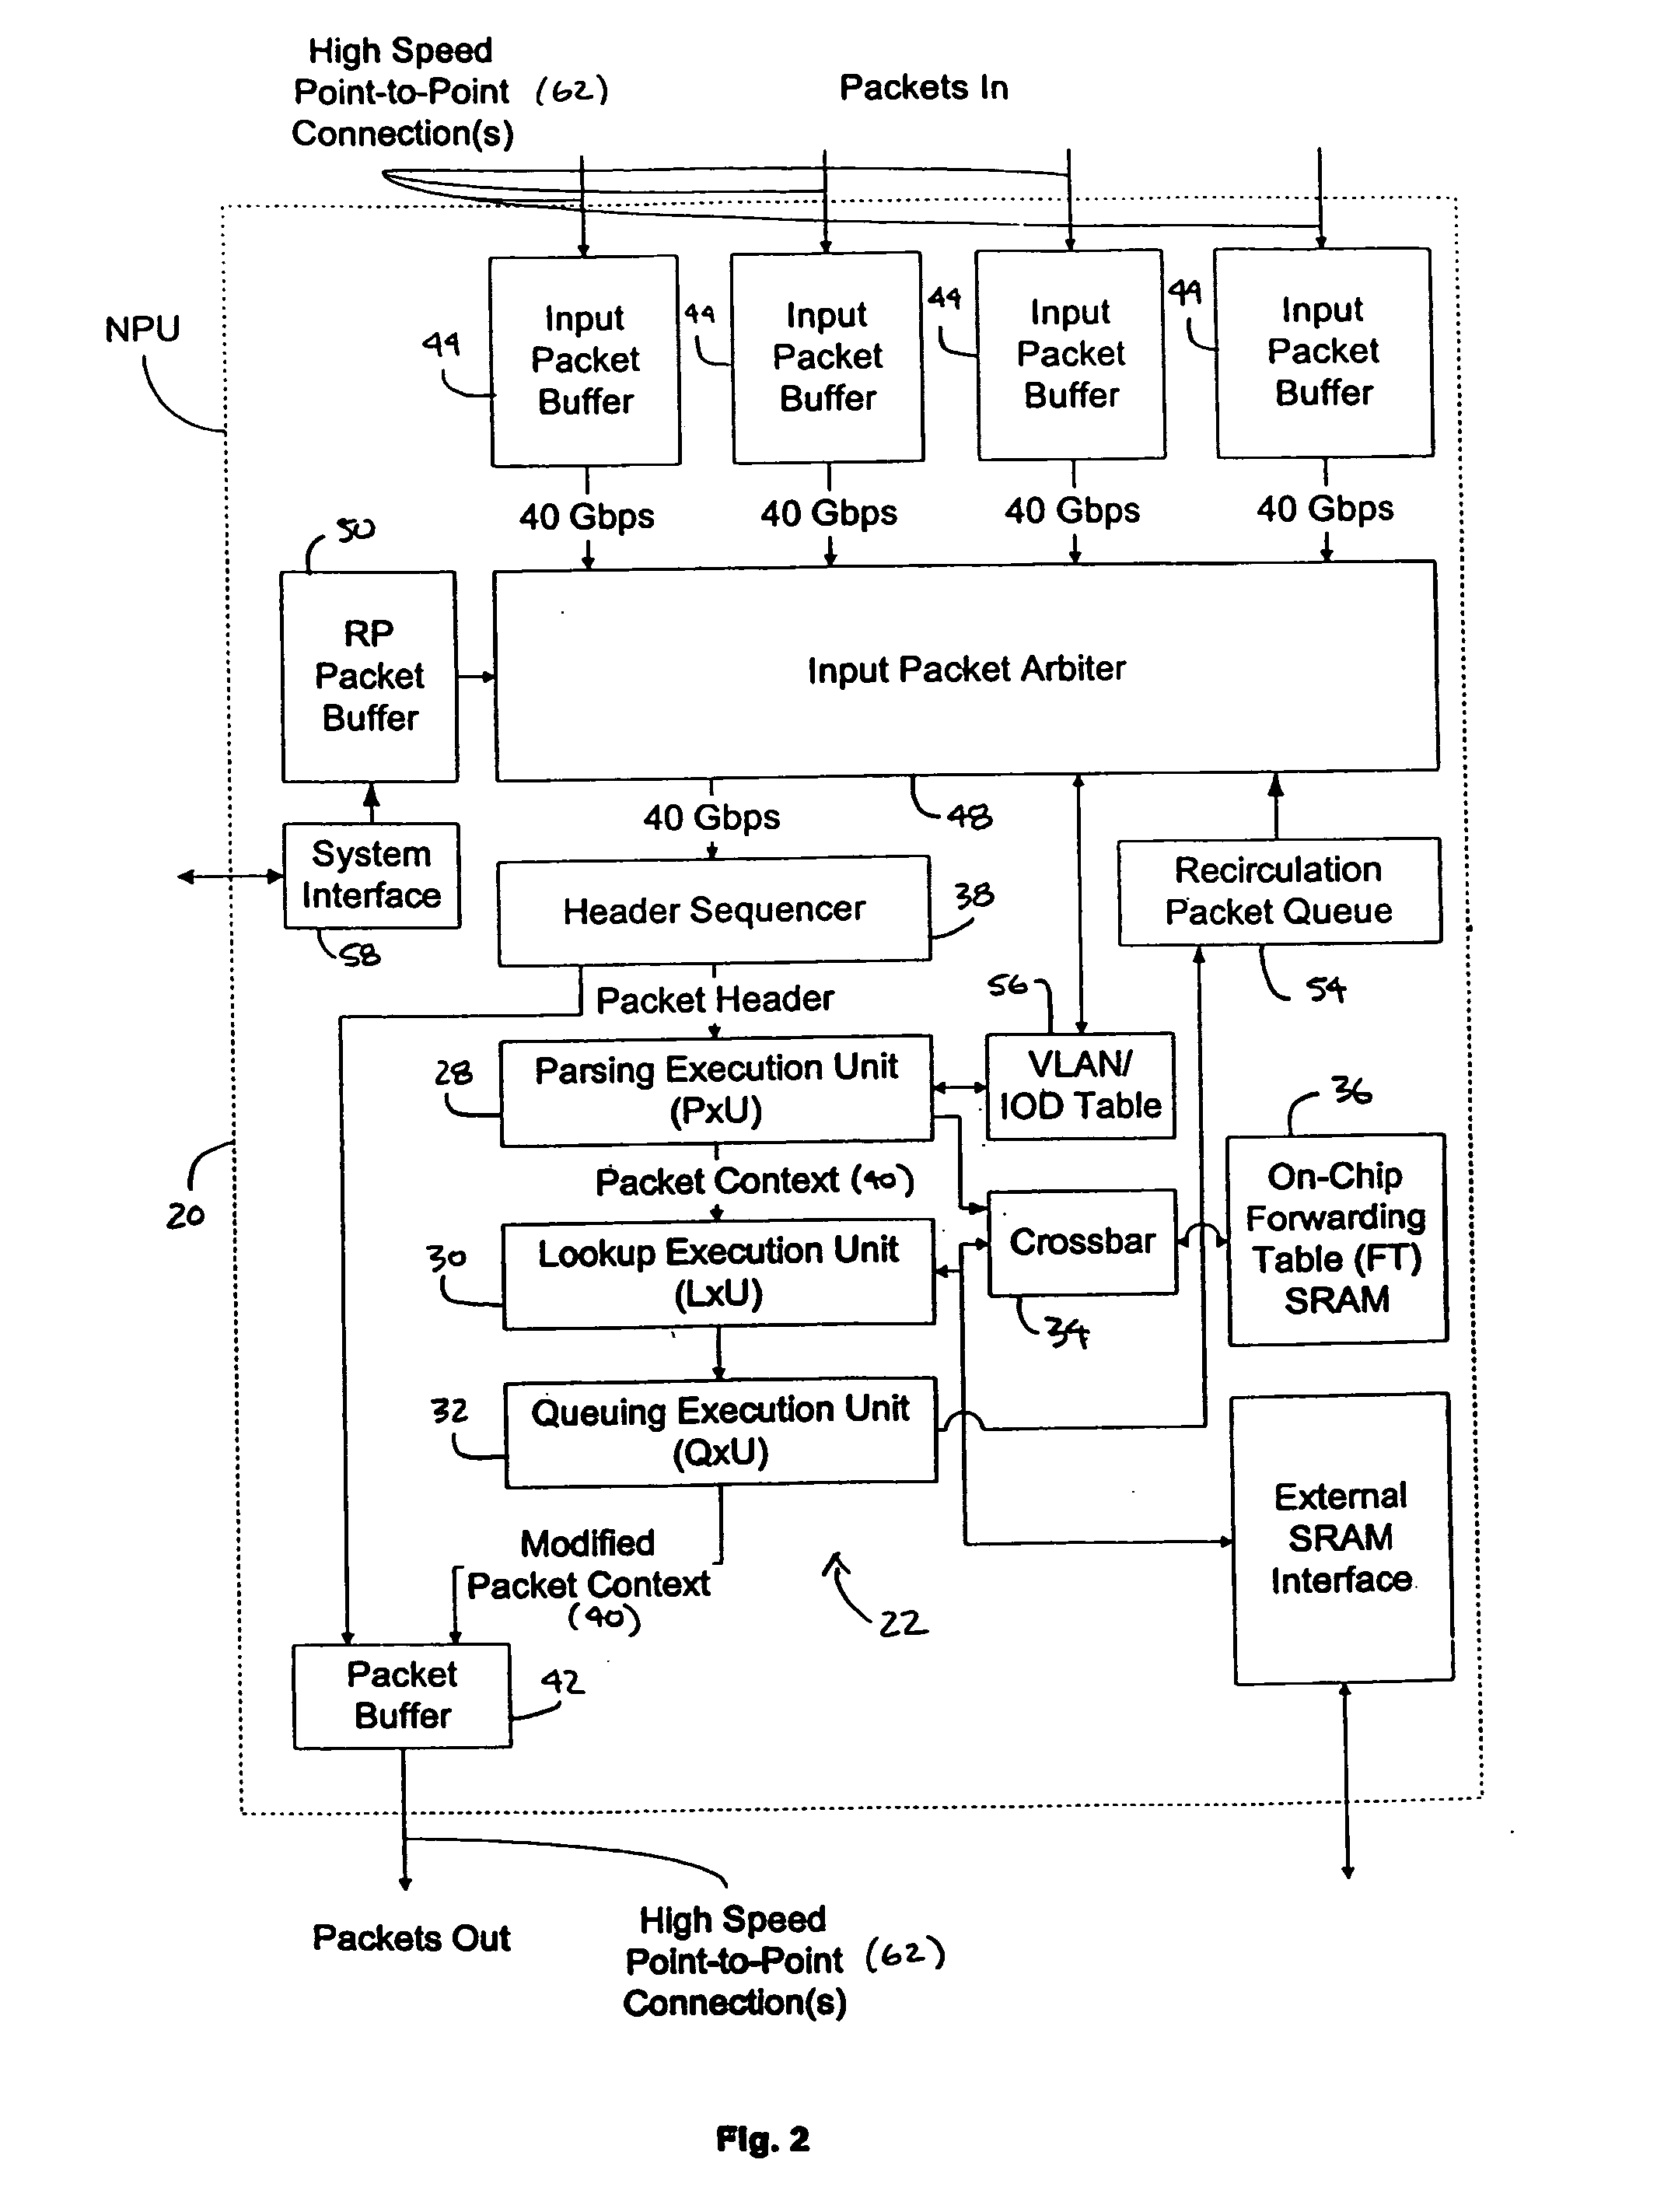 Processing unit for efficiently determining a packet's destination in a packet-switched network